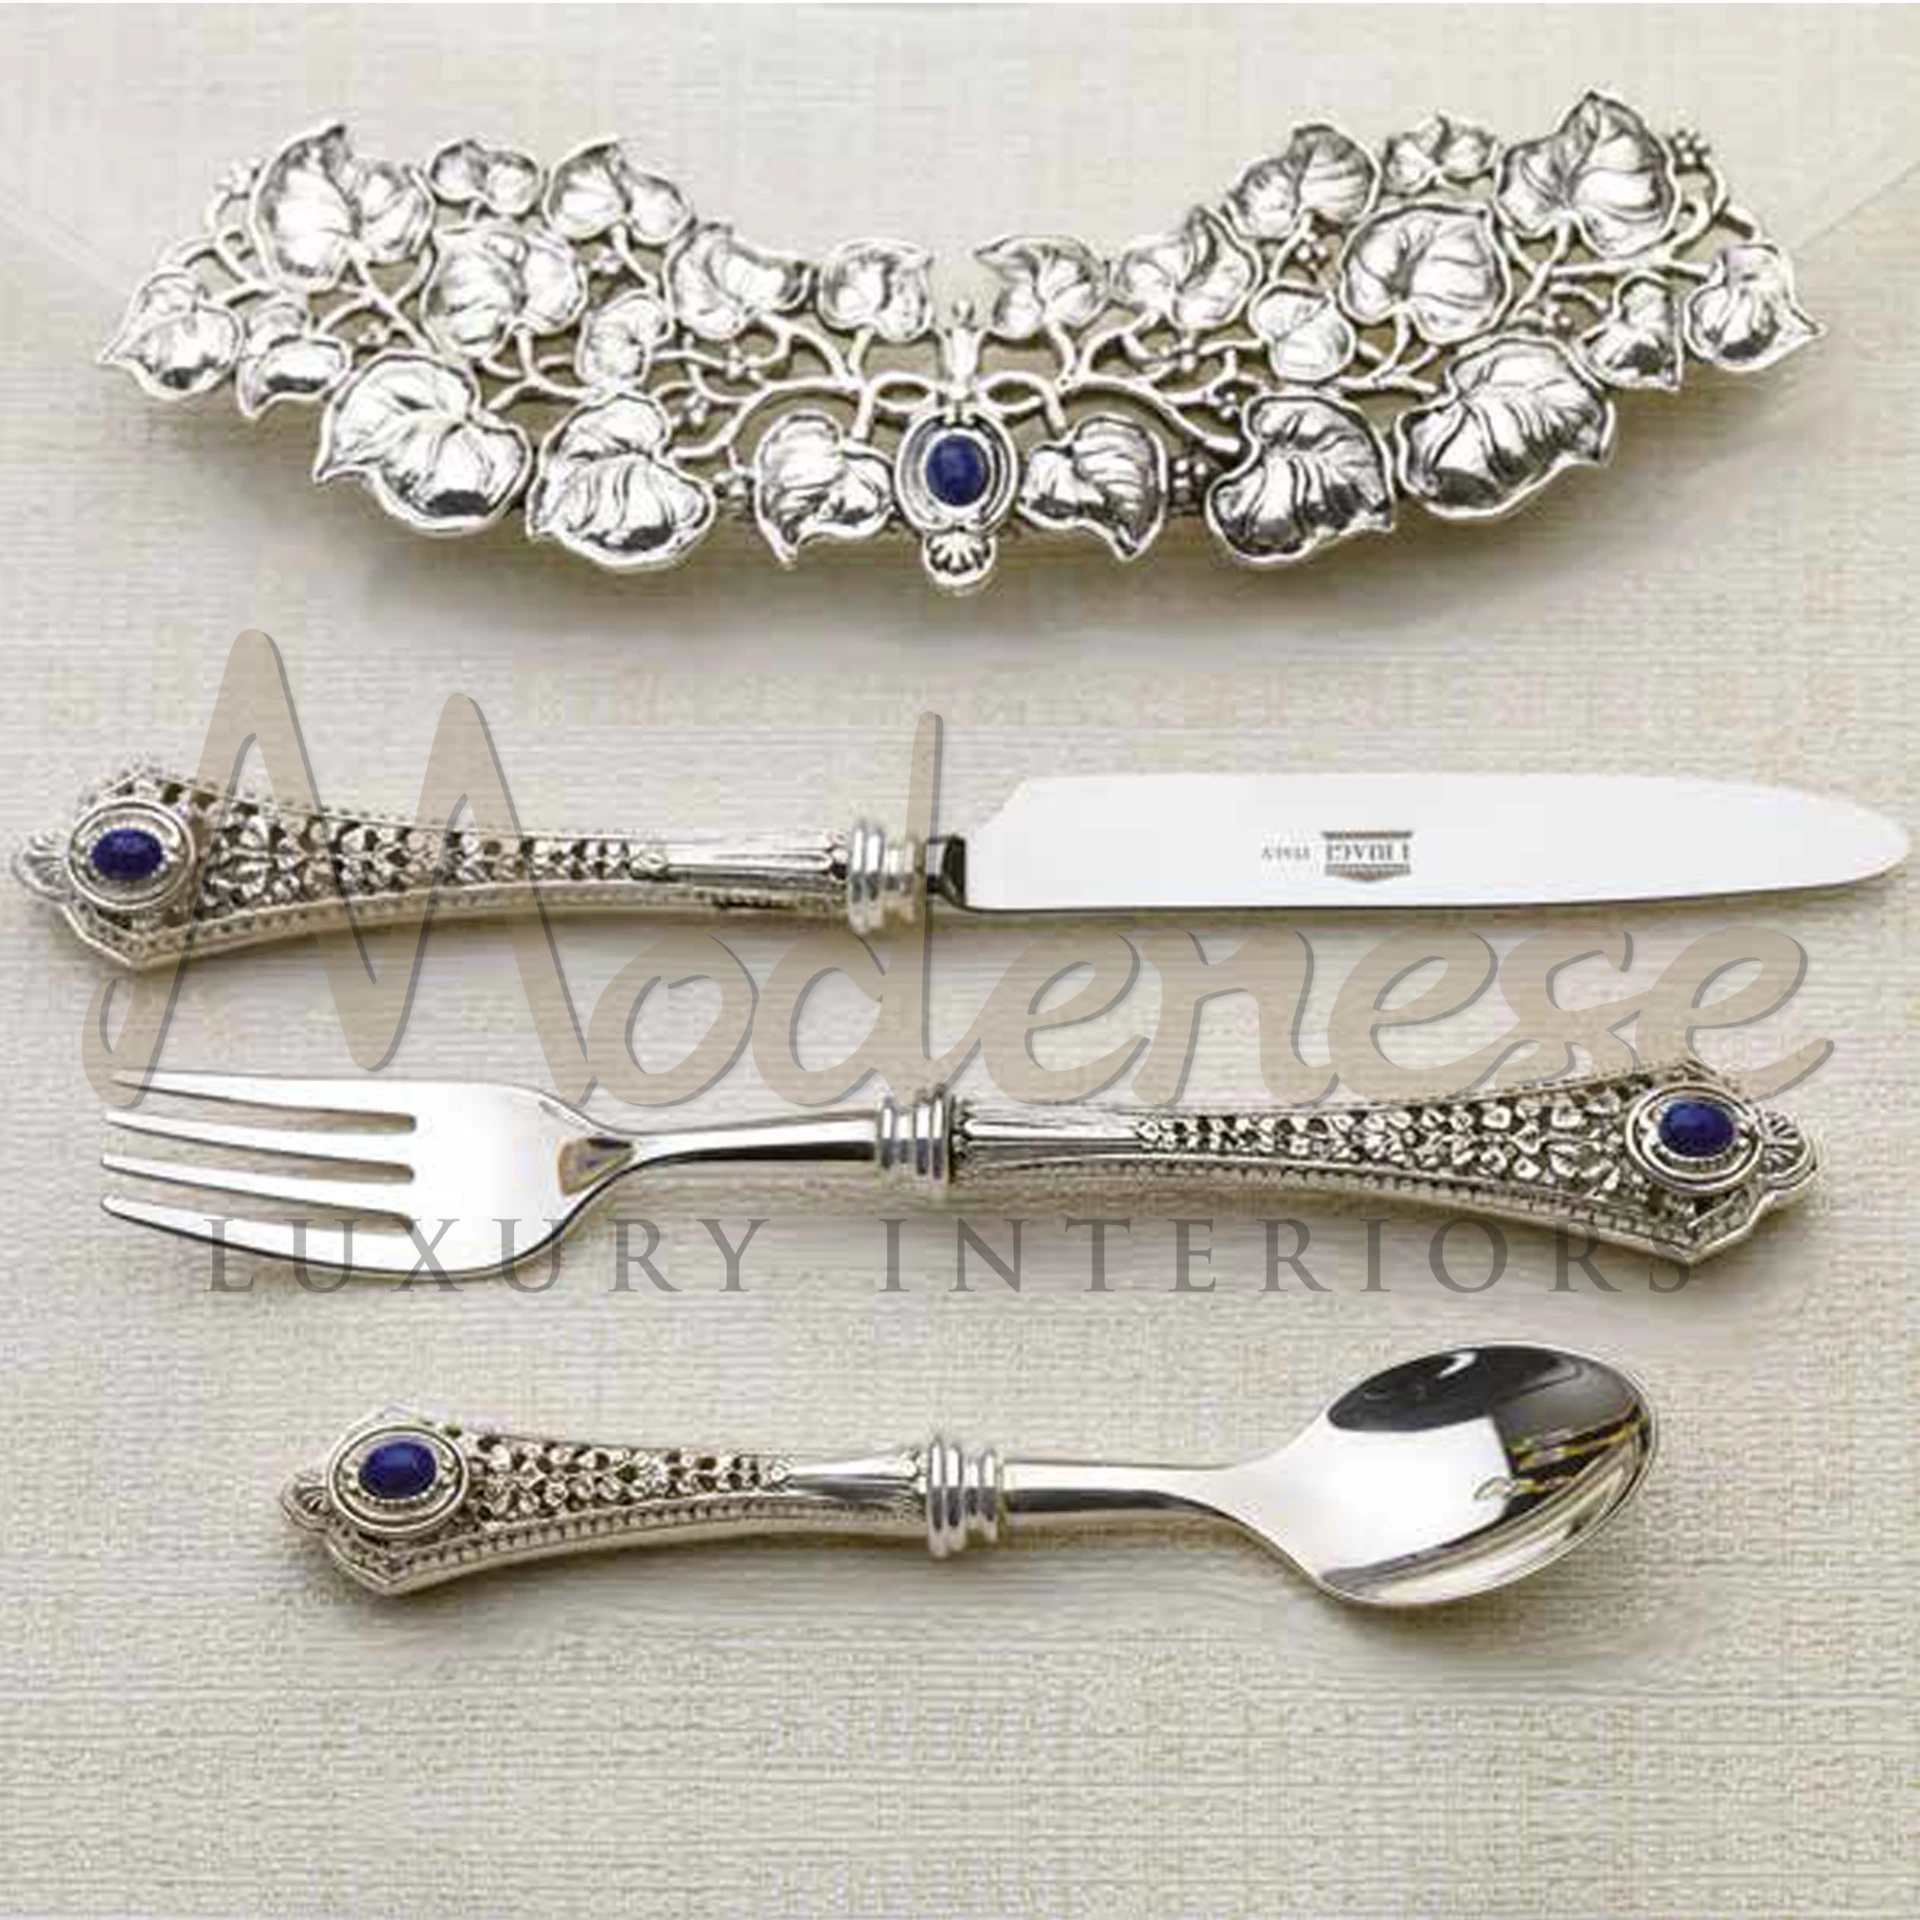 Elegant Modenese Tableware cutlery collection featuring intricate designs and blue stone